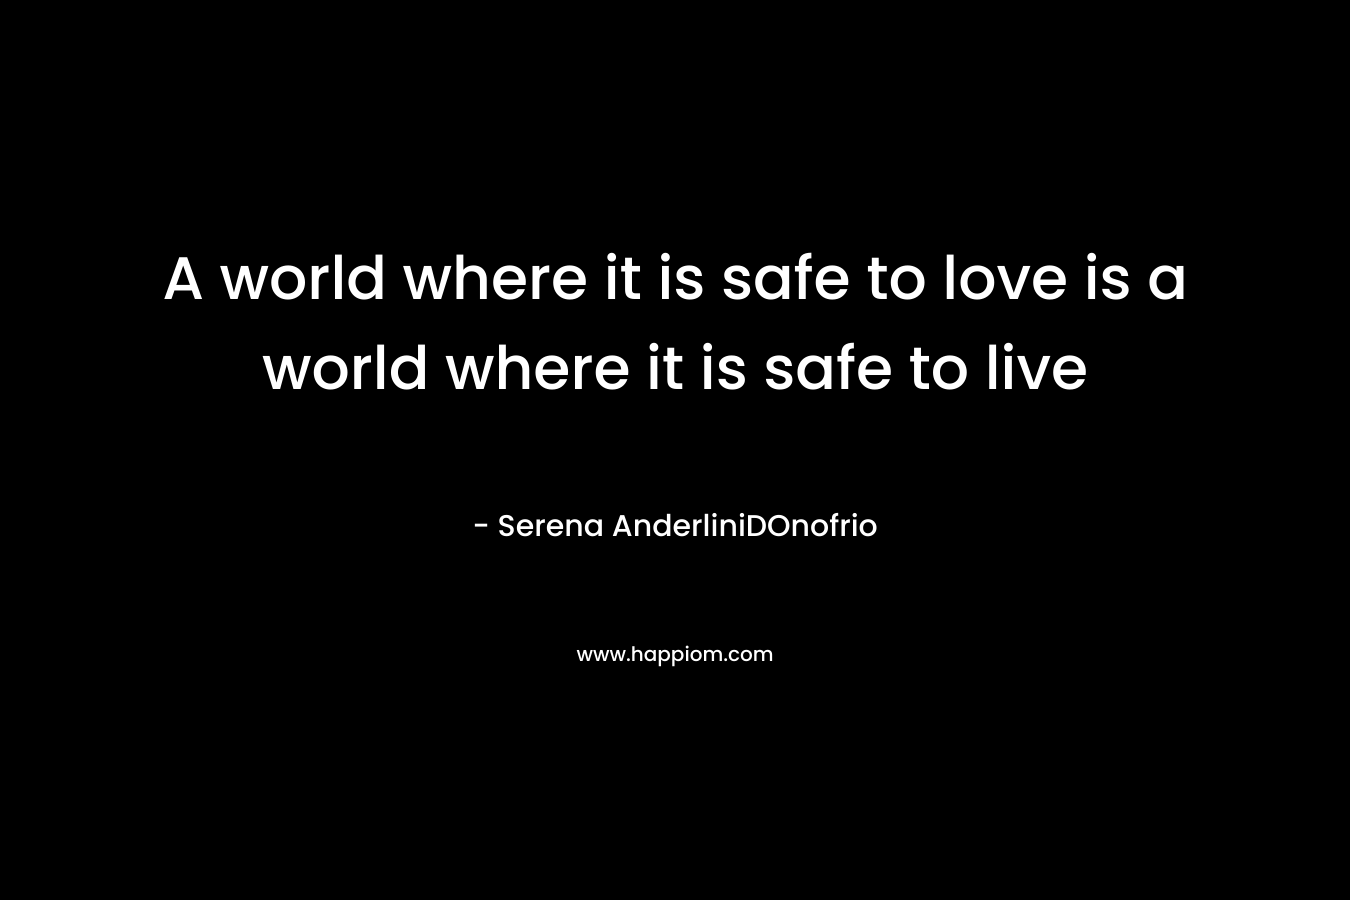 A world where it is safe to love is a world where it is safe to live